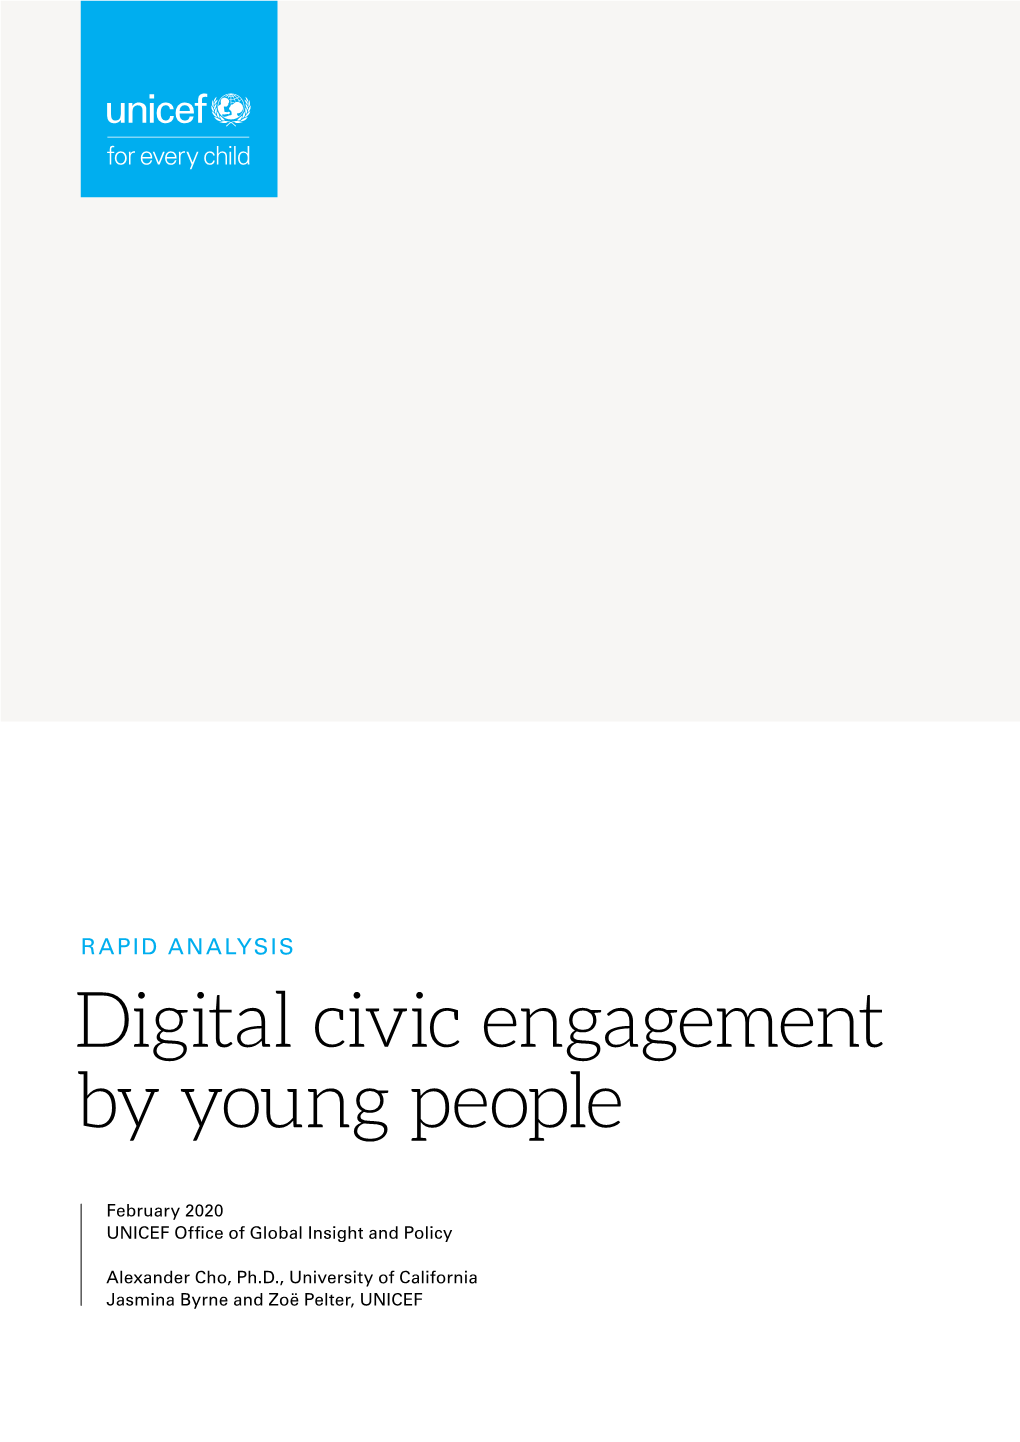 Digital Civic Engagement by Young People